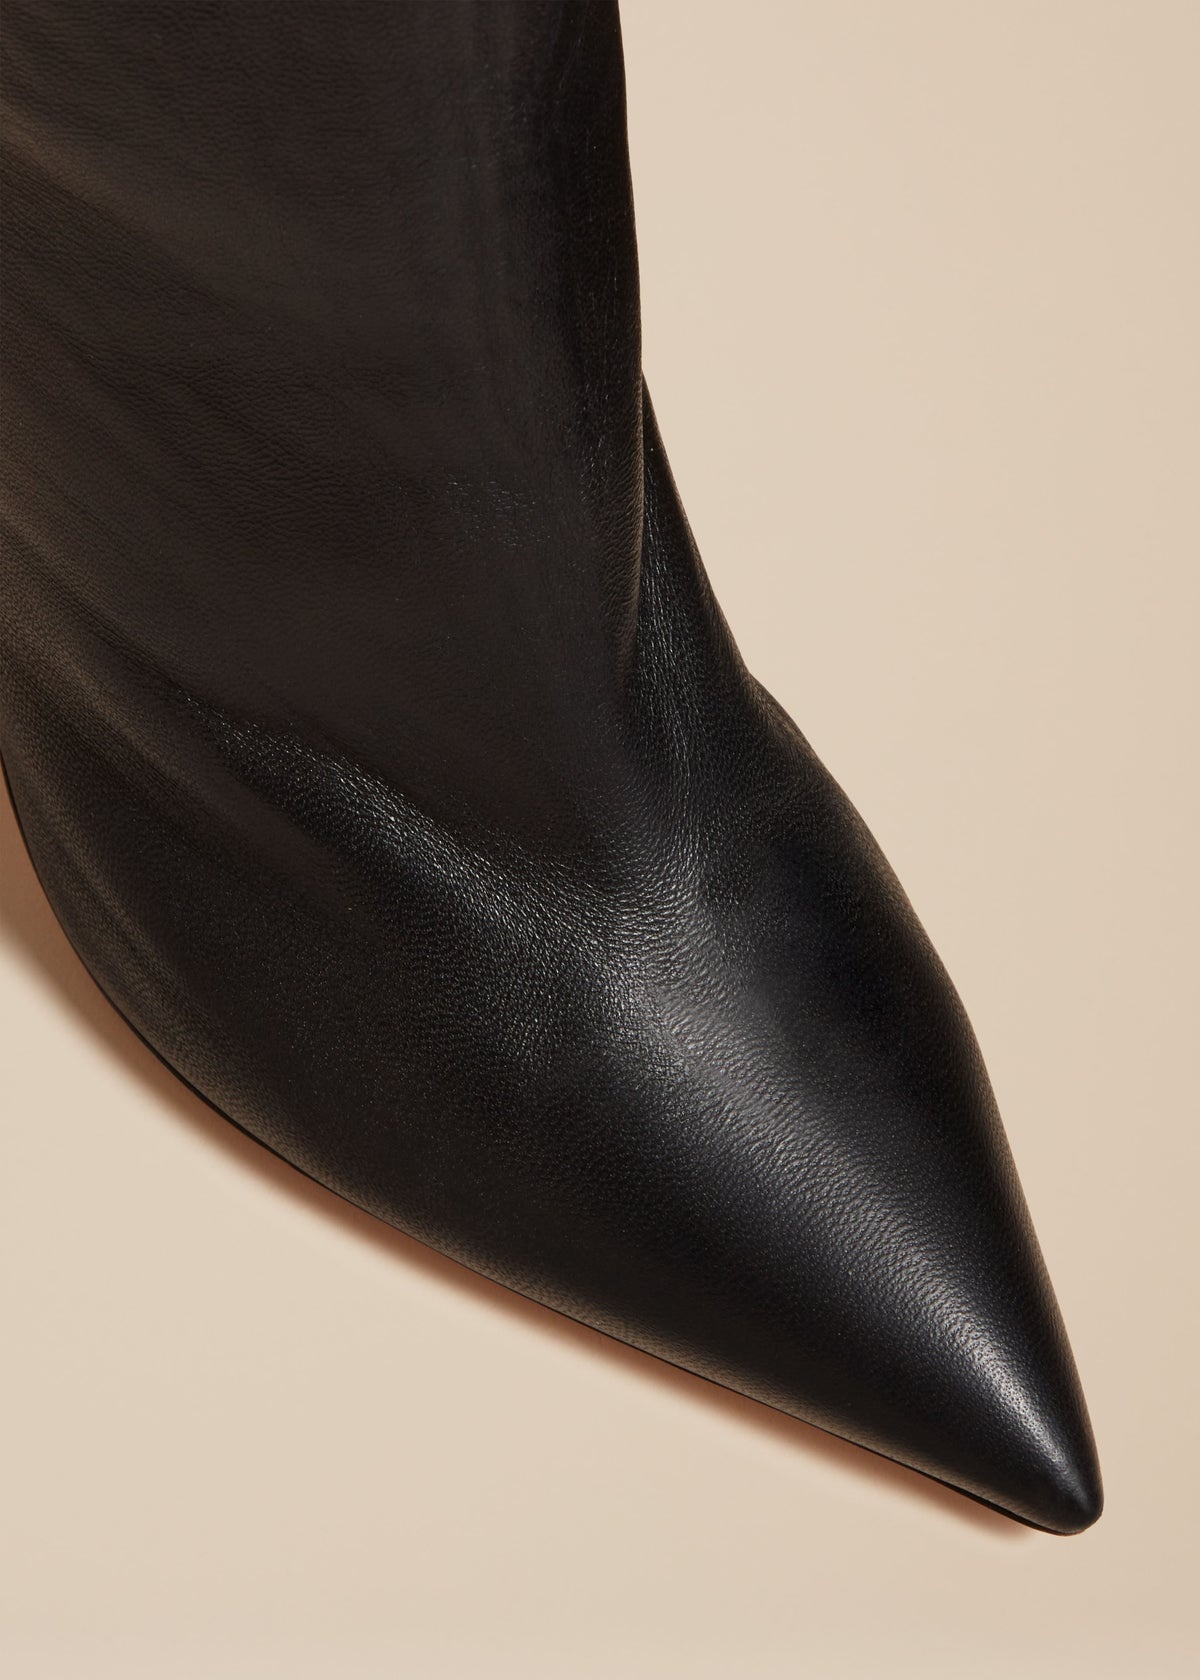 The River Knee-High Boot in Black Leather - 4